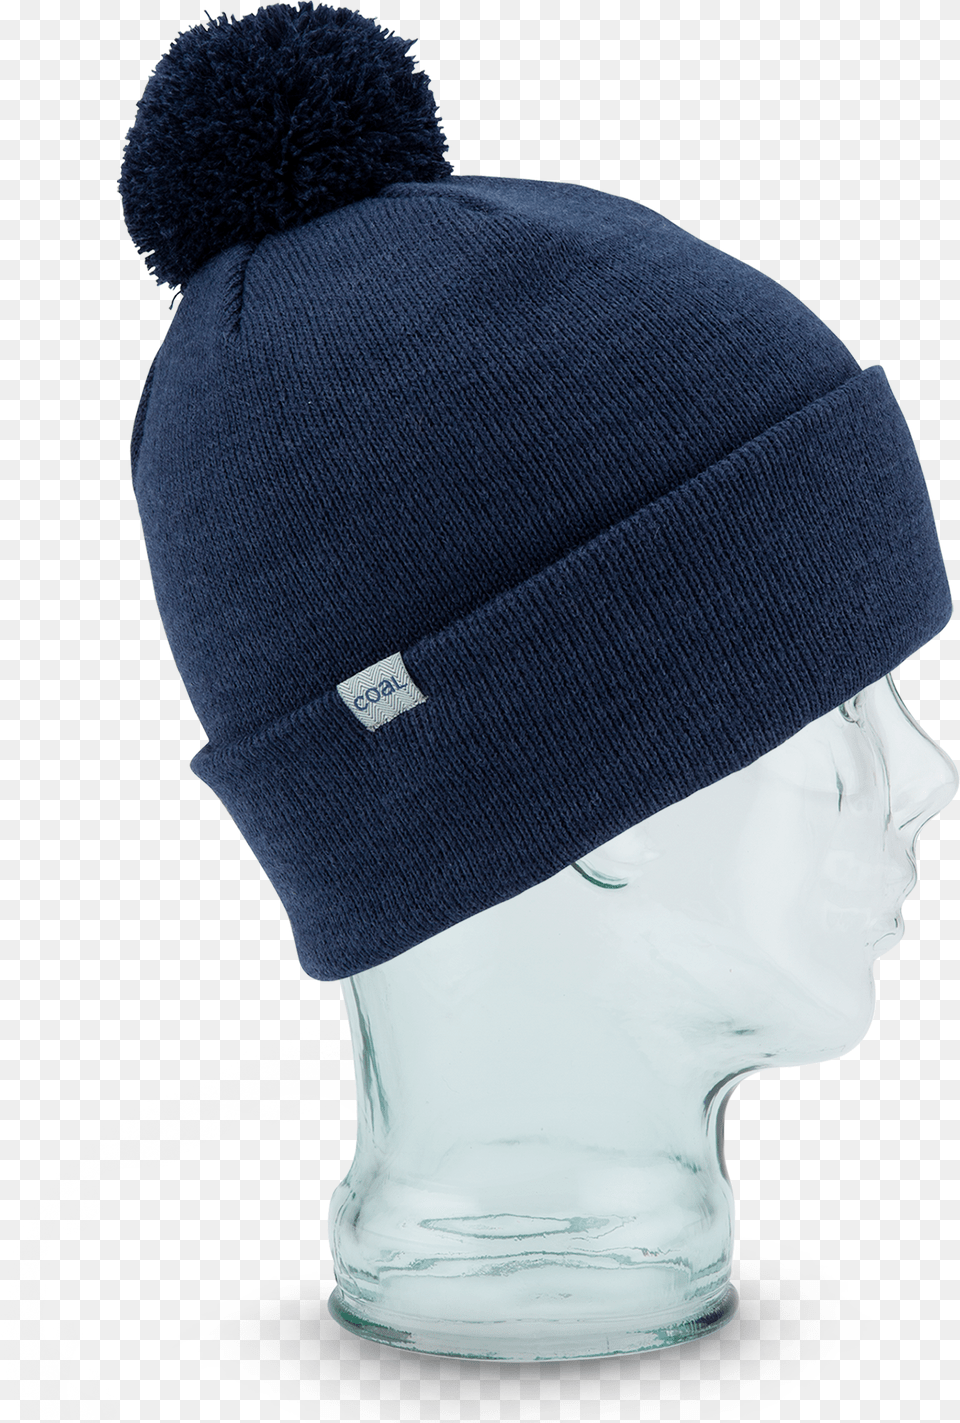 Pablo Navy Coal Harbor Beanie Heather Burgundy One Size, Cap, Clothing, Hat, Adult Free Transparent Png